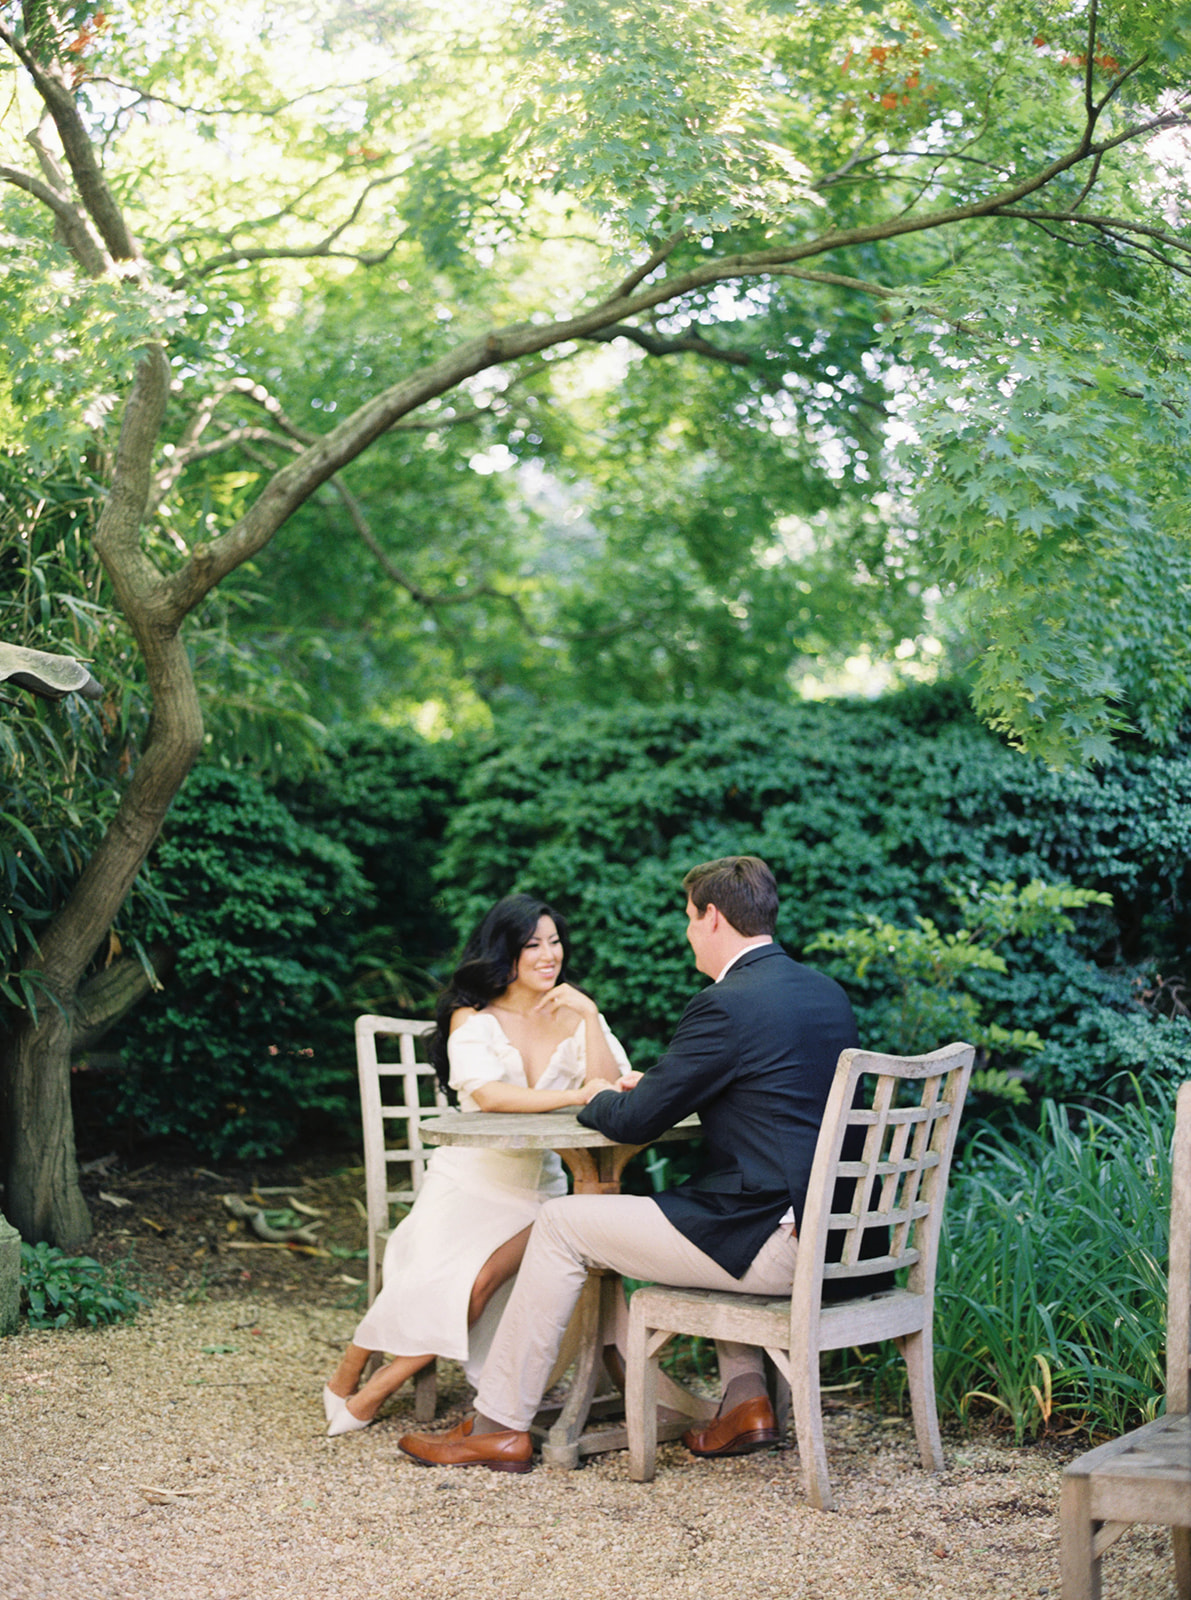 A couple poses for their engagement session in a garden.